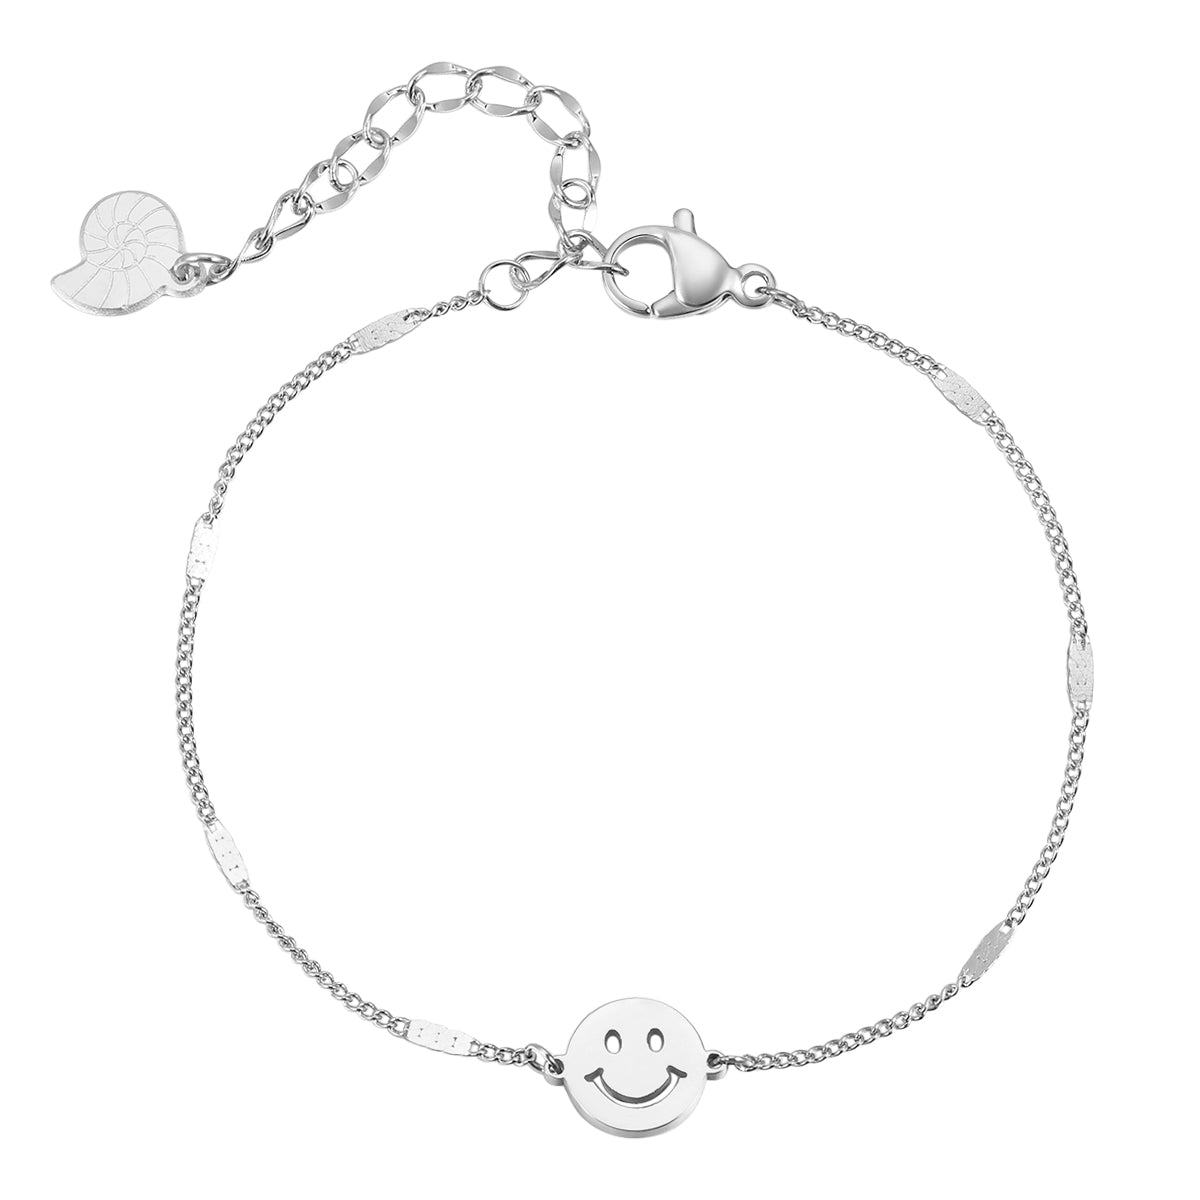 Happiness in Armband Silber Anhänger Smiley Hey Gesicht –